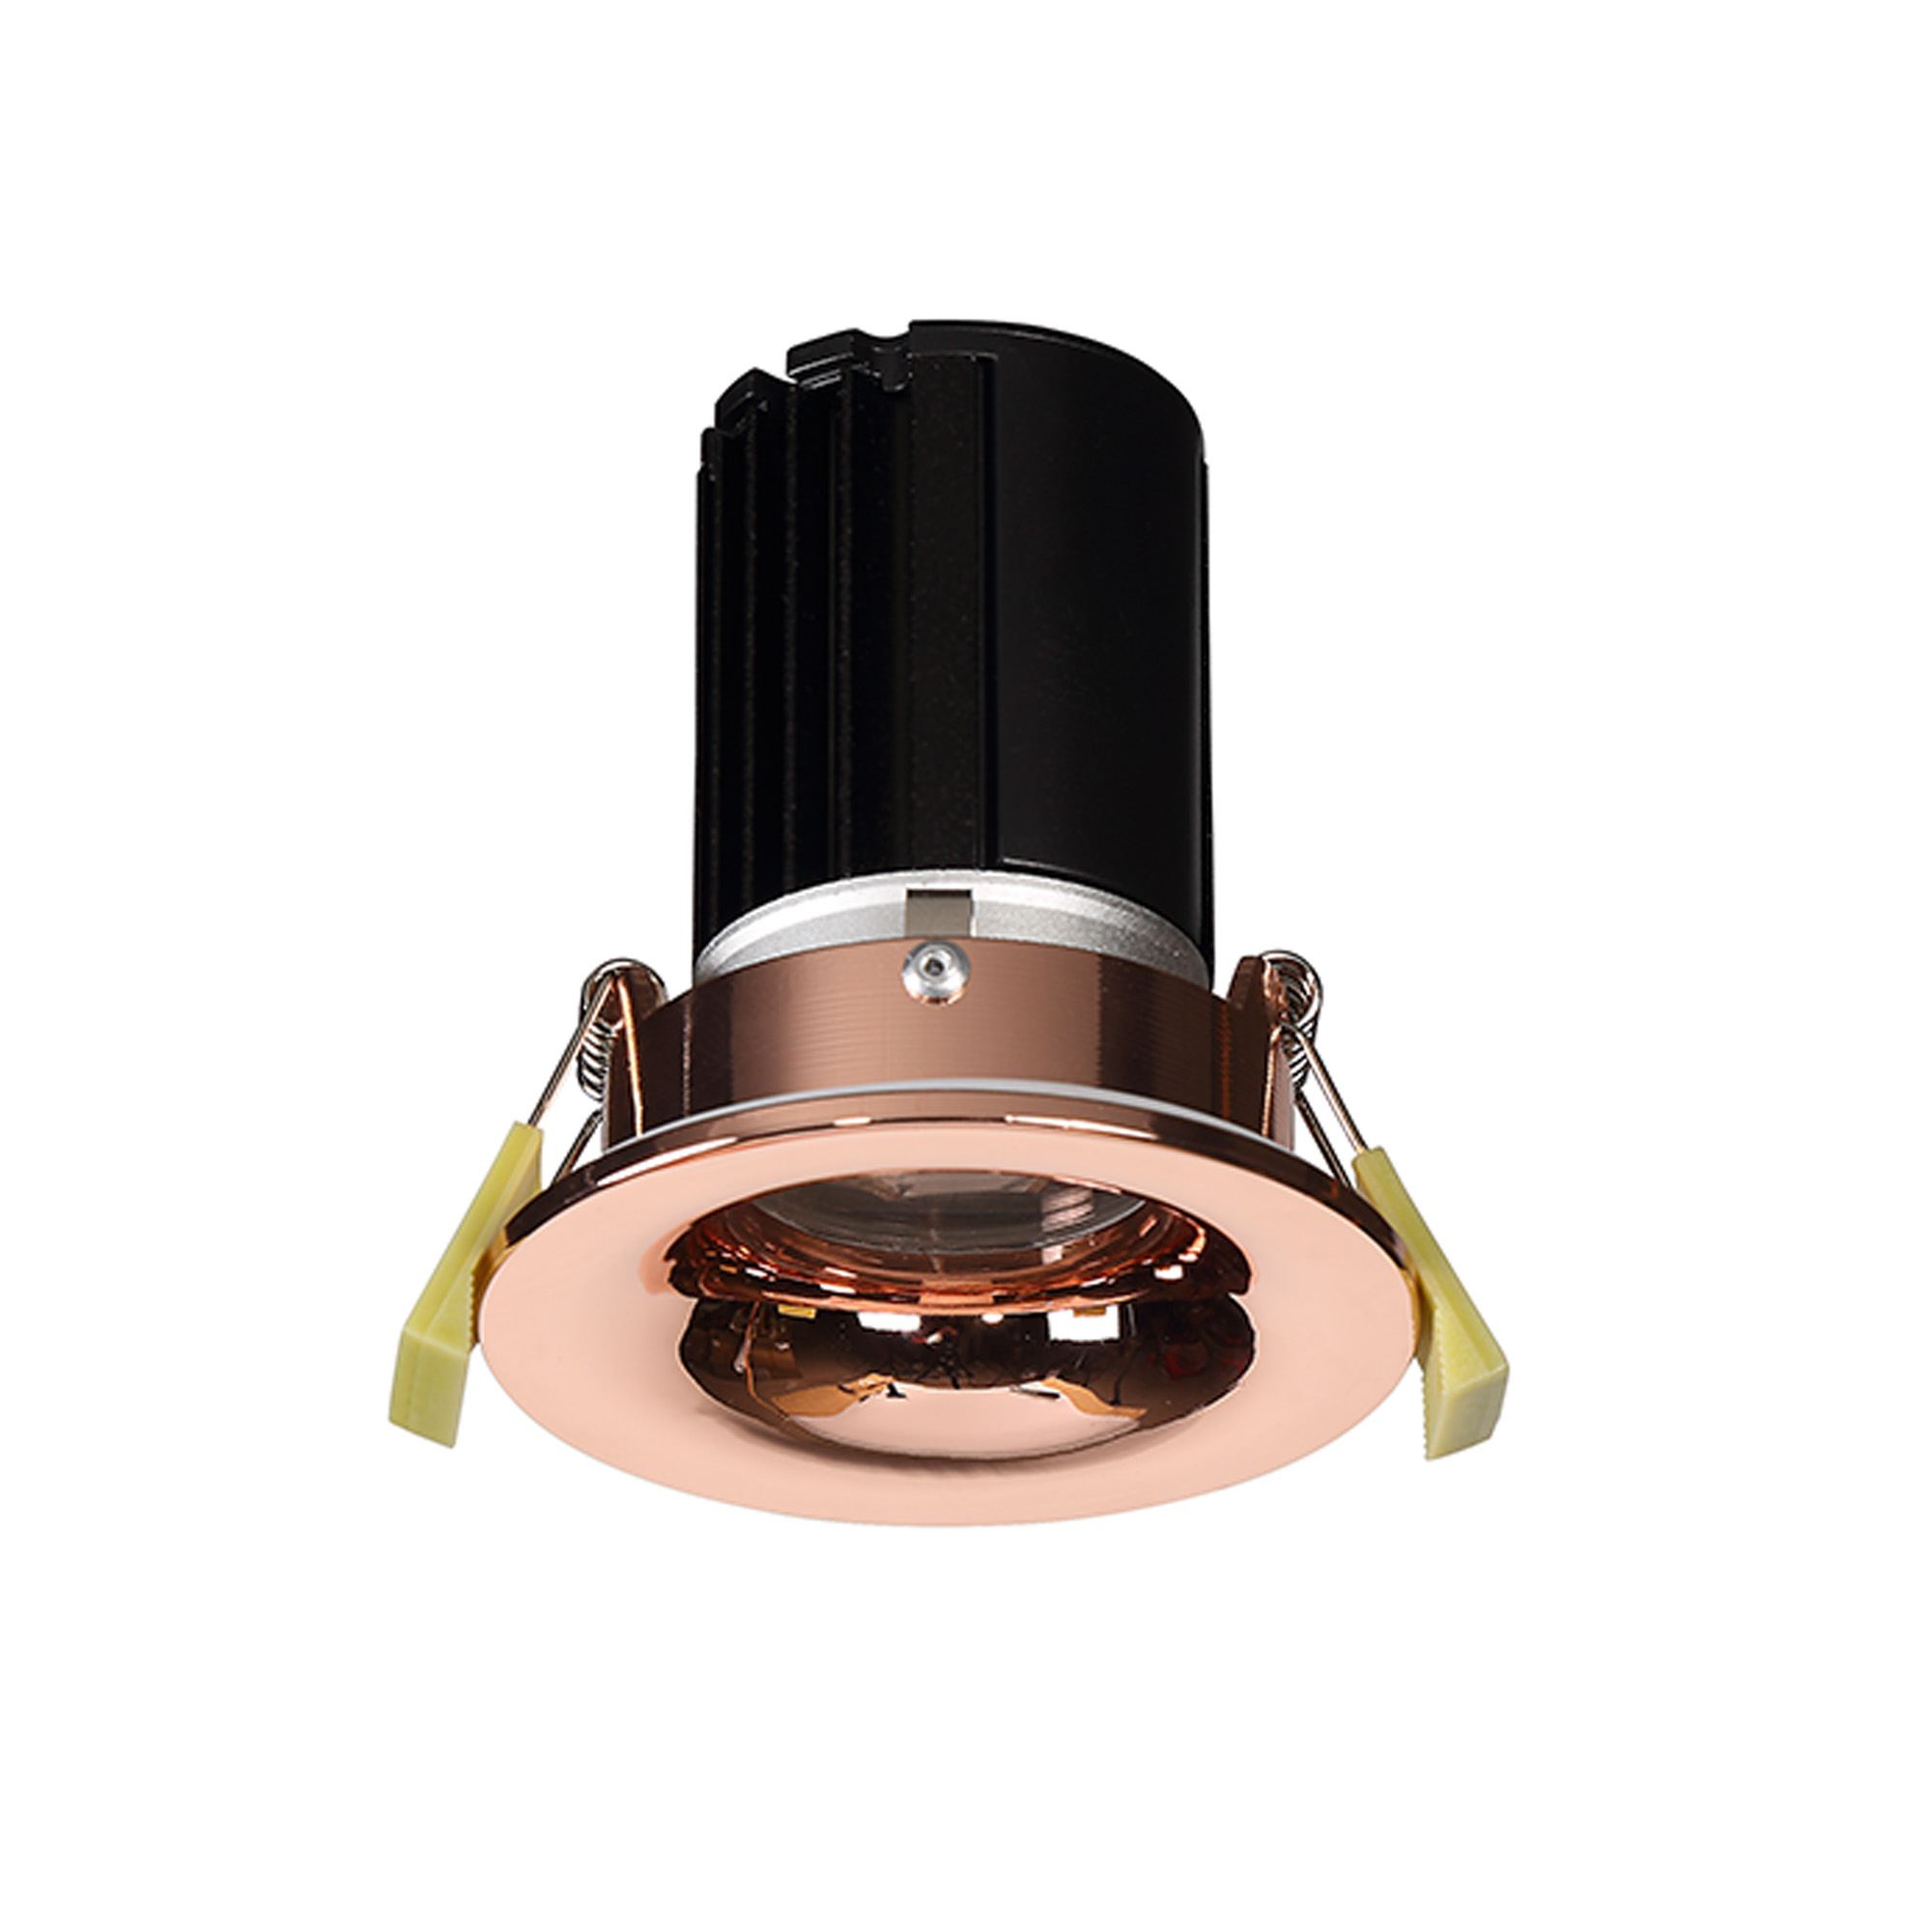 DM201492  Bruve 9 Tridonic powered 9W 2700K 700lm 24° LED Engine;250mA ; CRI>90 LED Engine Rose Gold Fixed Round Recessed Downlight; Inner Glass cover; IP65